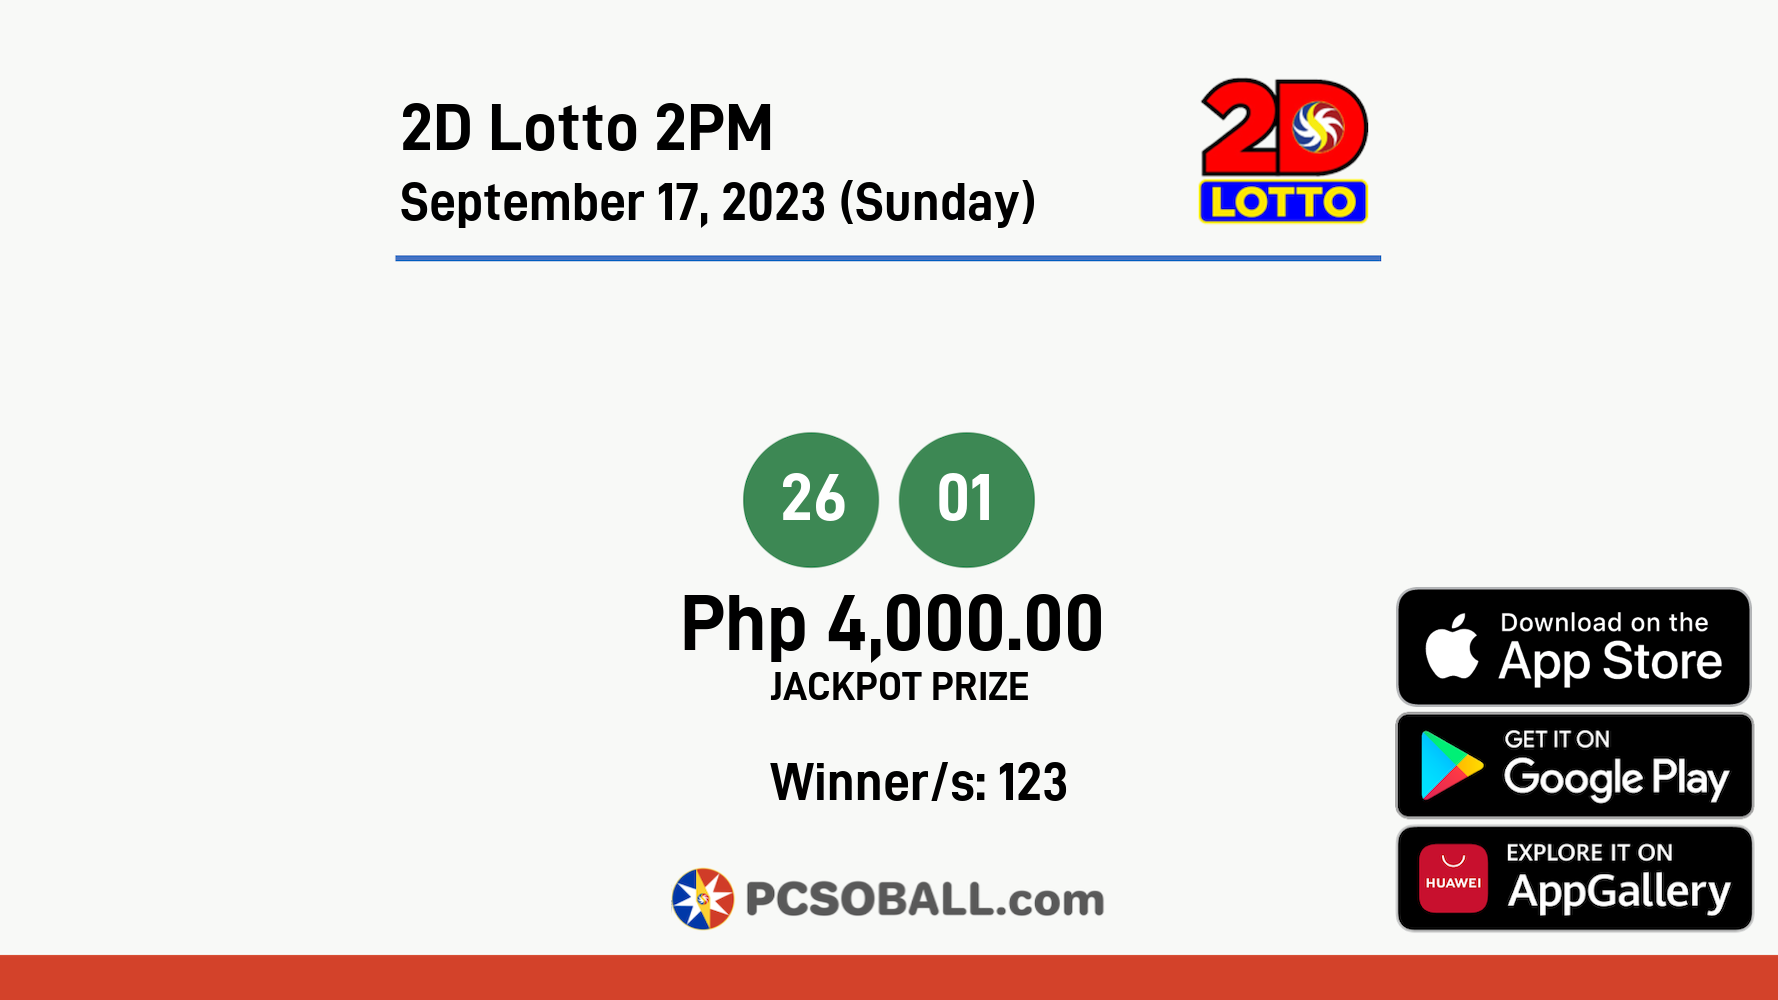 2D Lotto 2PM September 17, 2023 (Sunday) Result